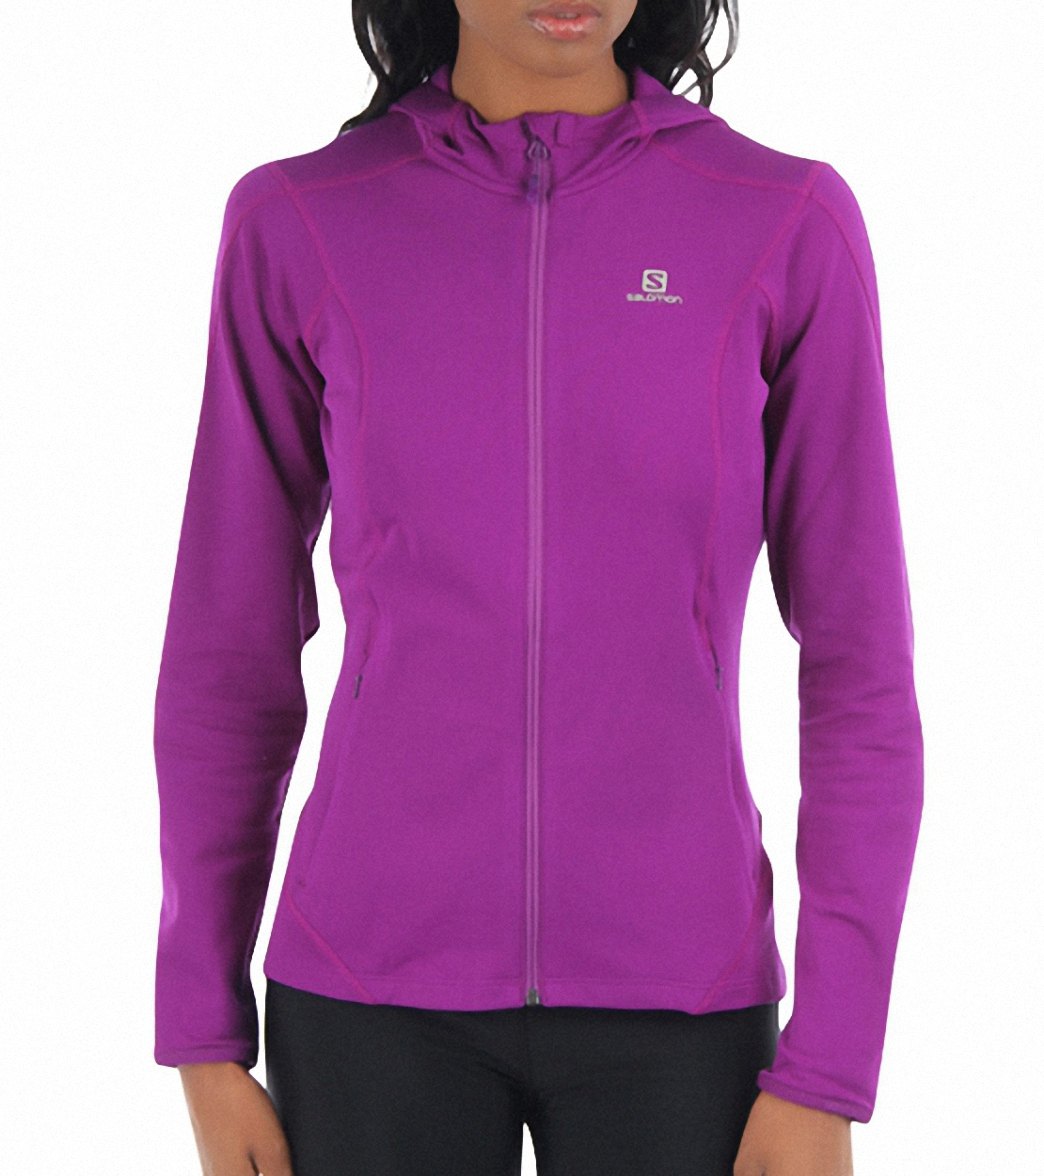 Salomon Women's Discovery Hooded Running Midlayer - Grape Juice X-Small - Swimoutlet.com